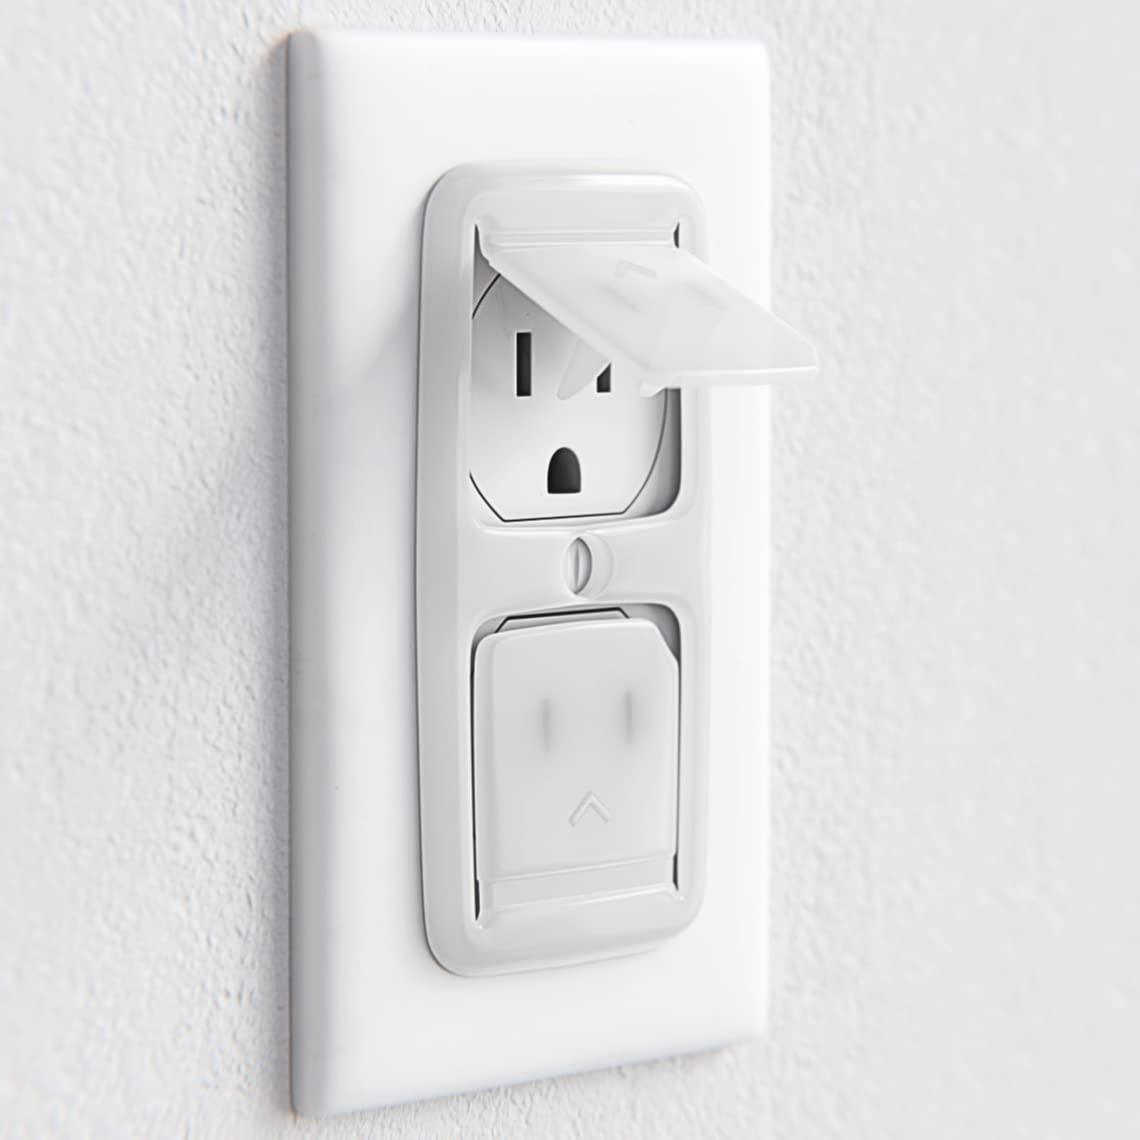 Block-It-Socket - Outlet Covers Baby Proofing (Made in USA) Never